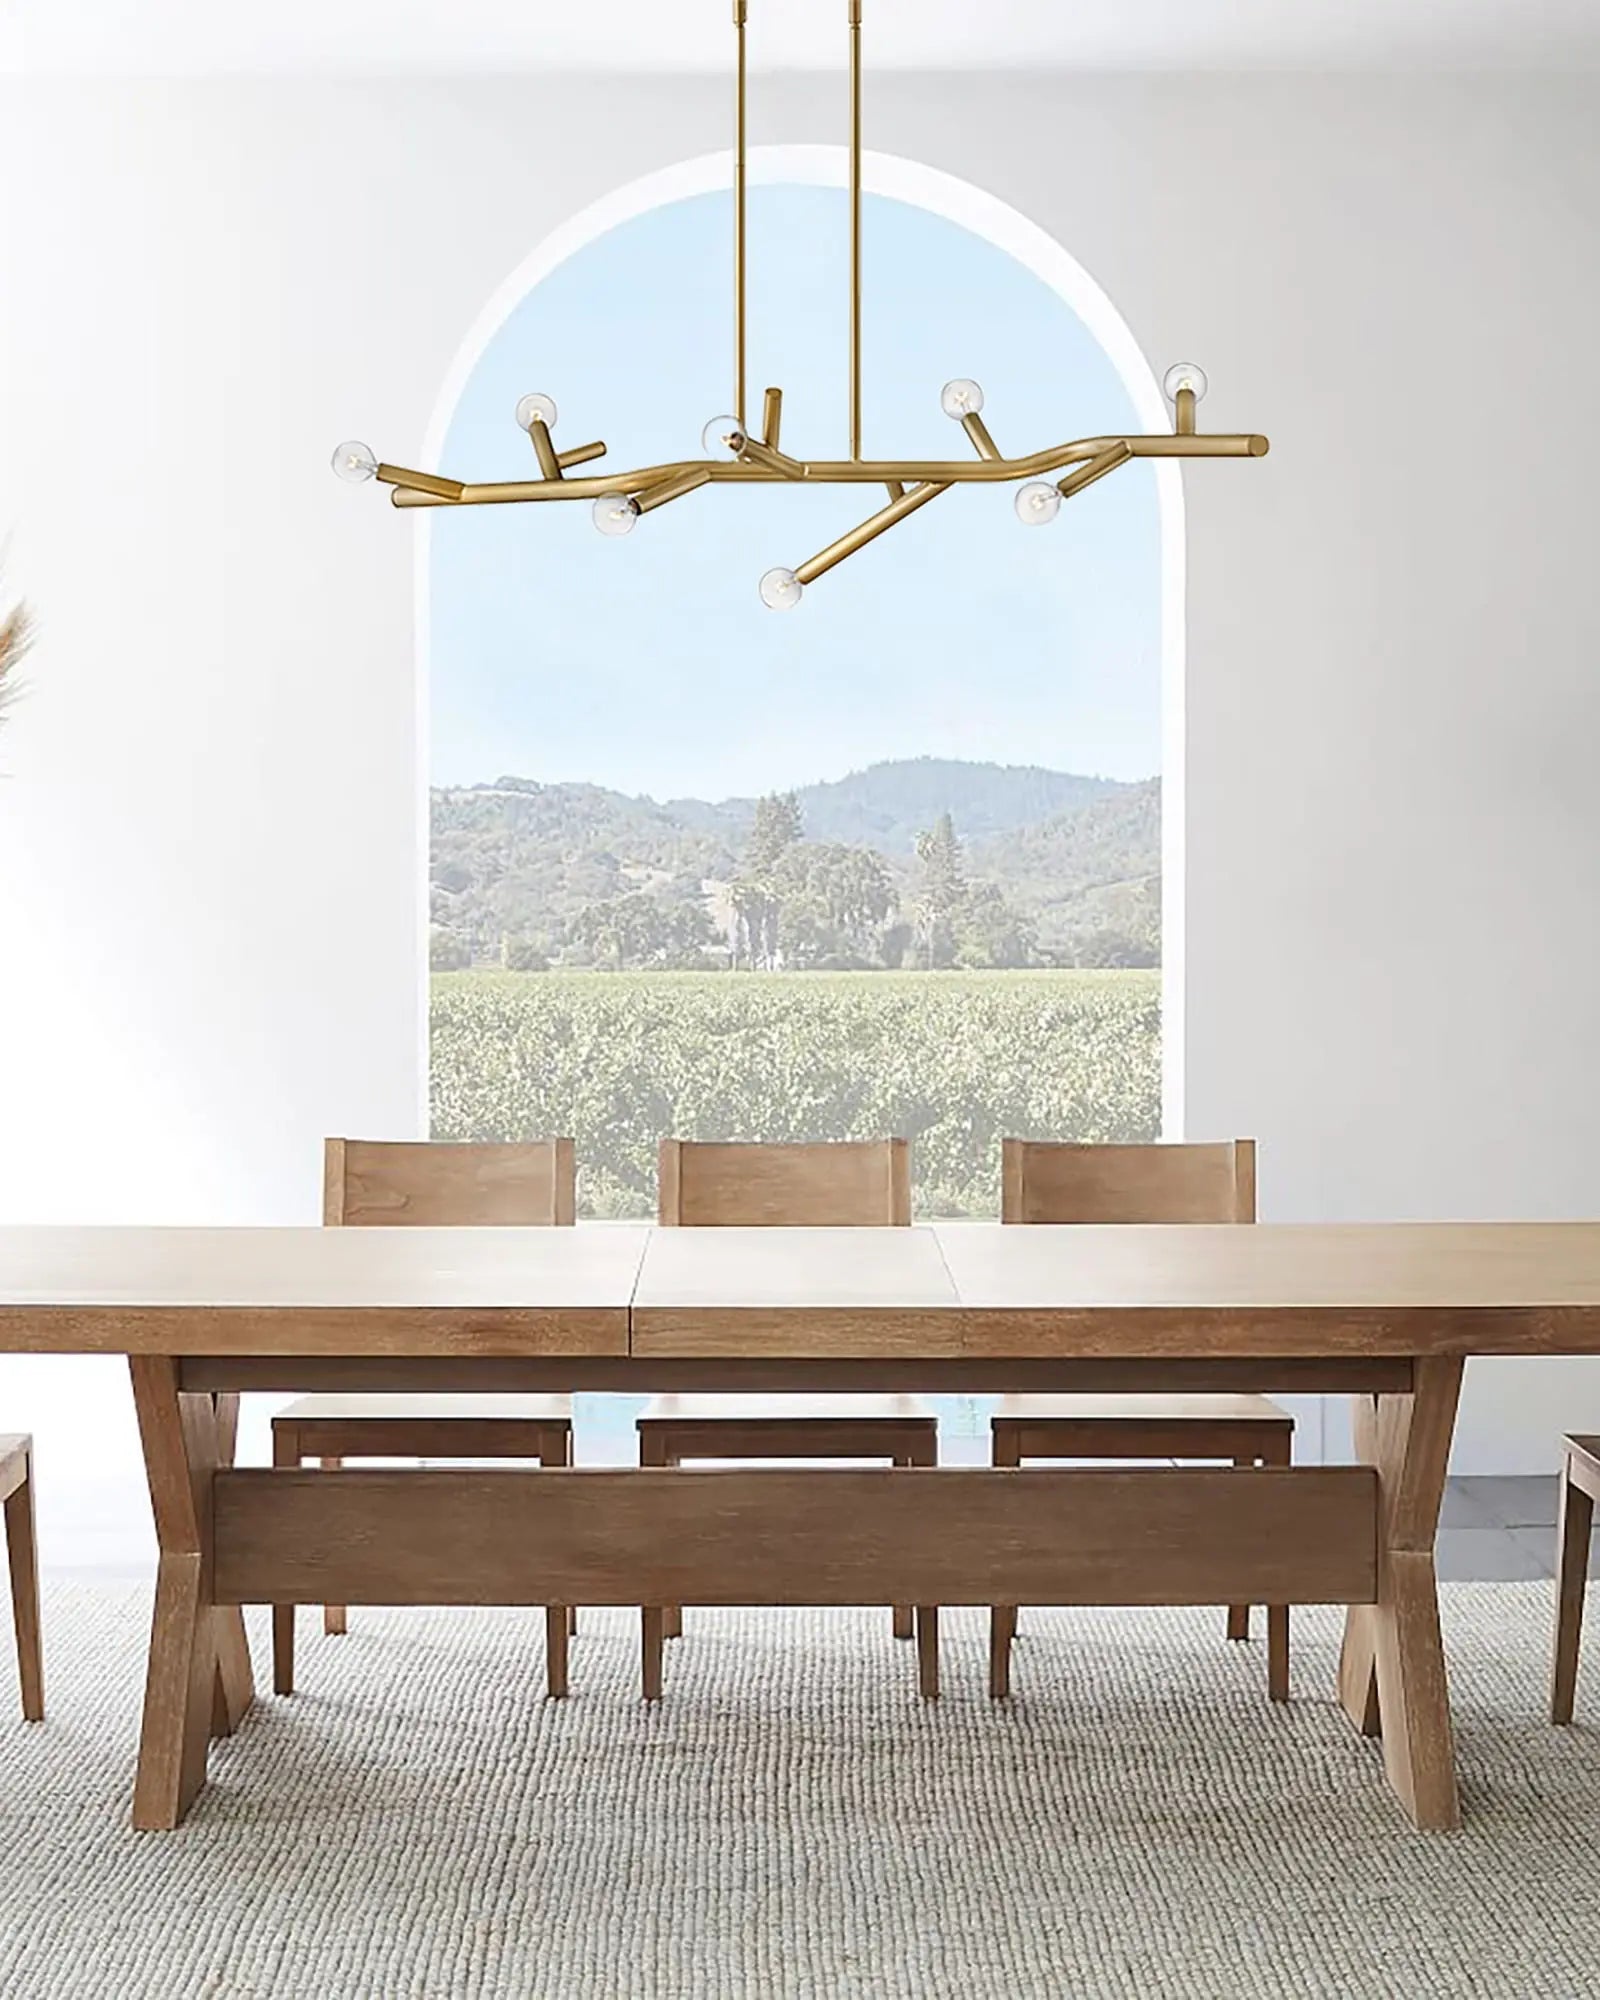 Twiggy Pendant Light above dining table